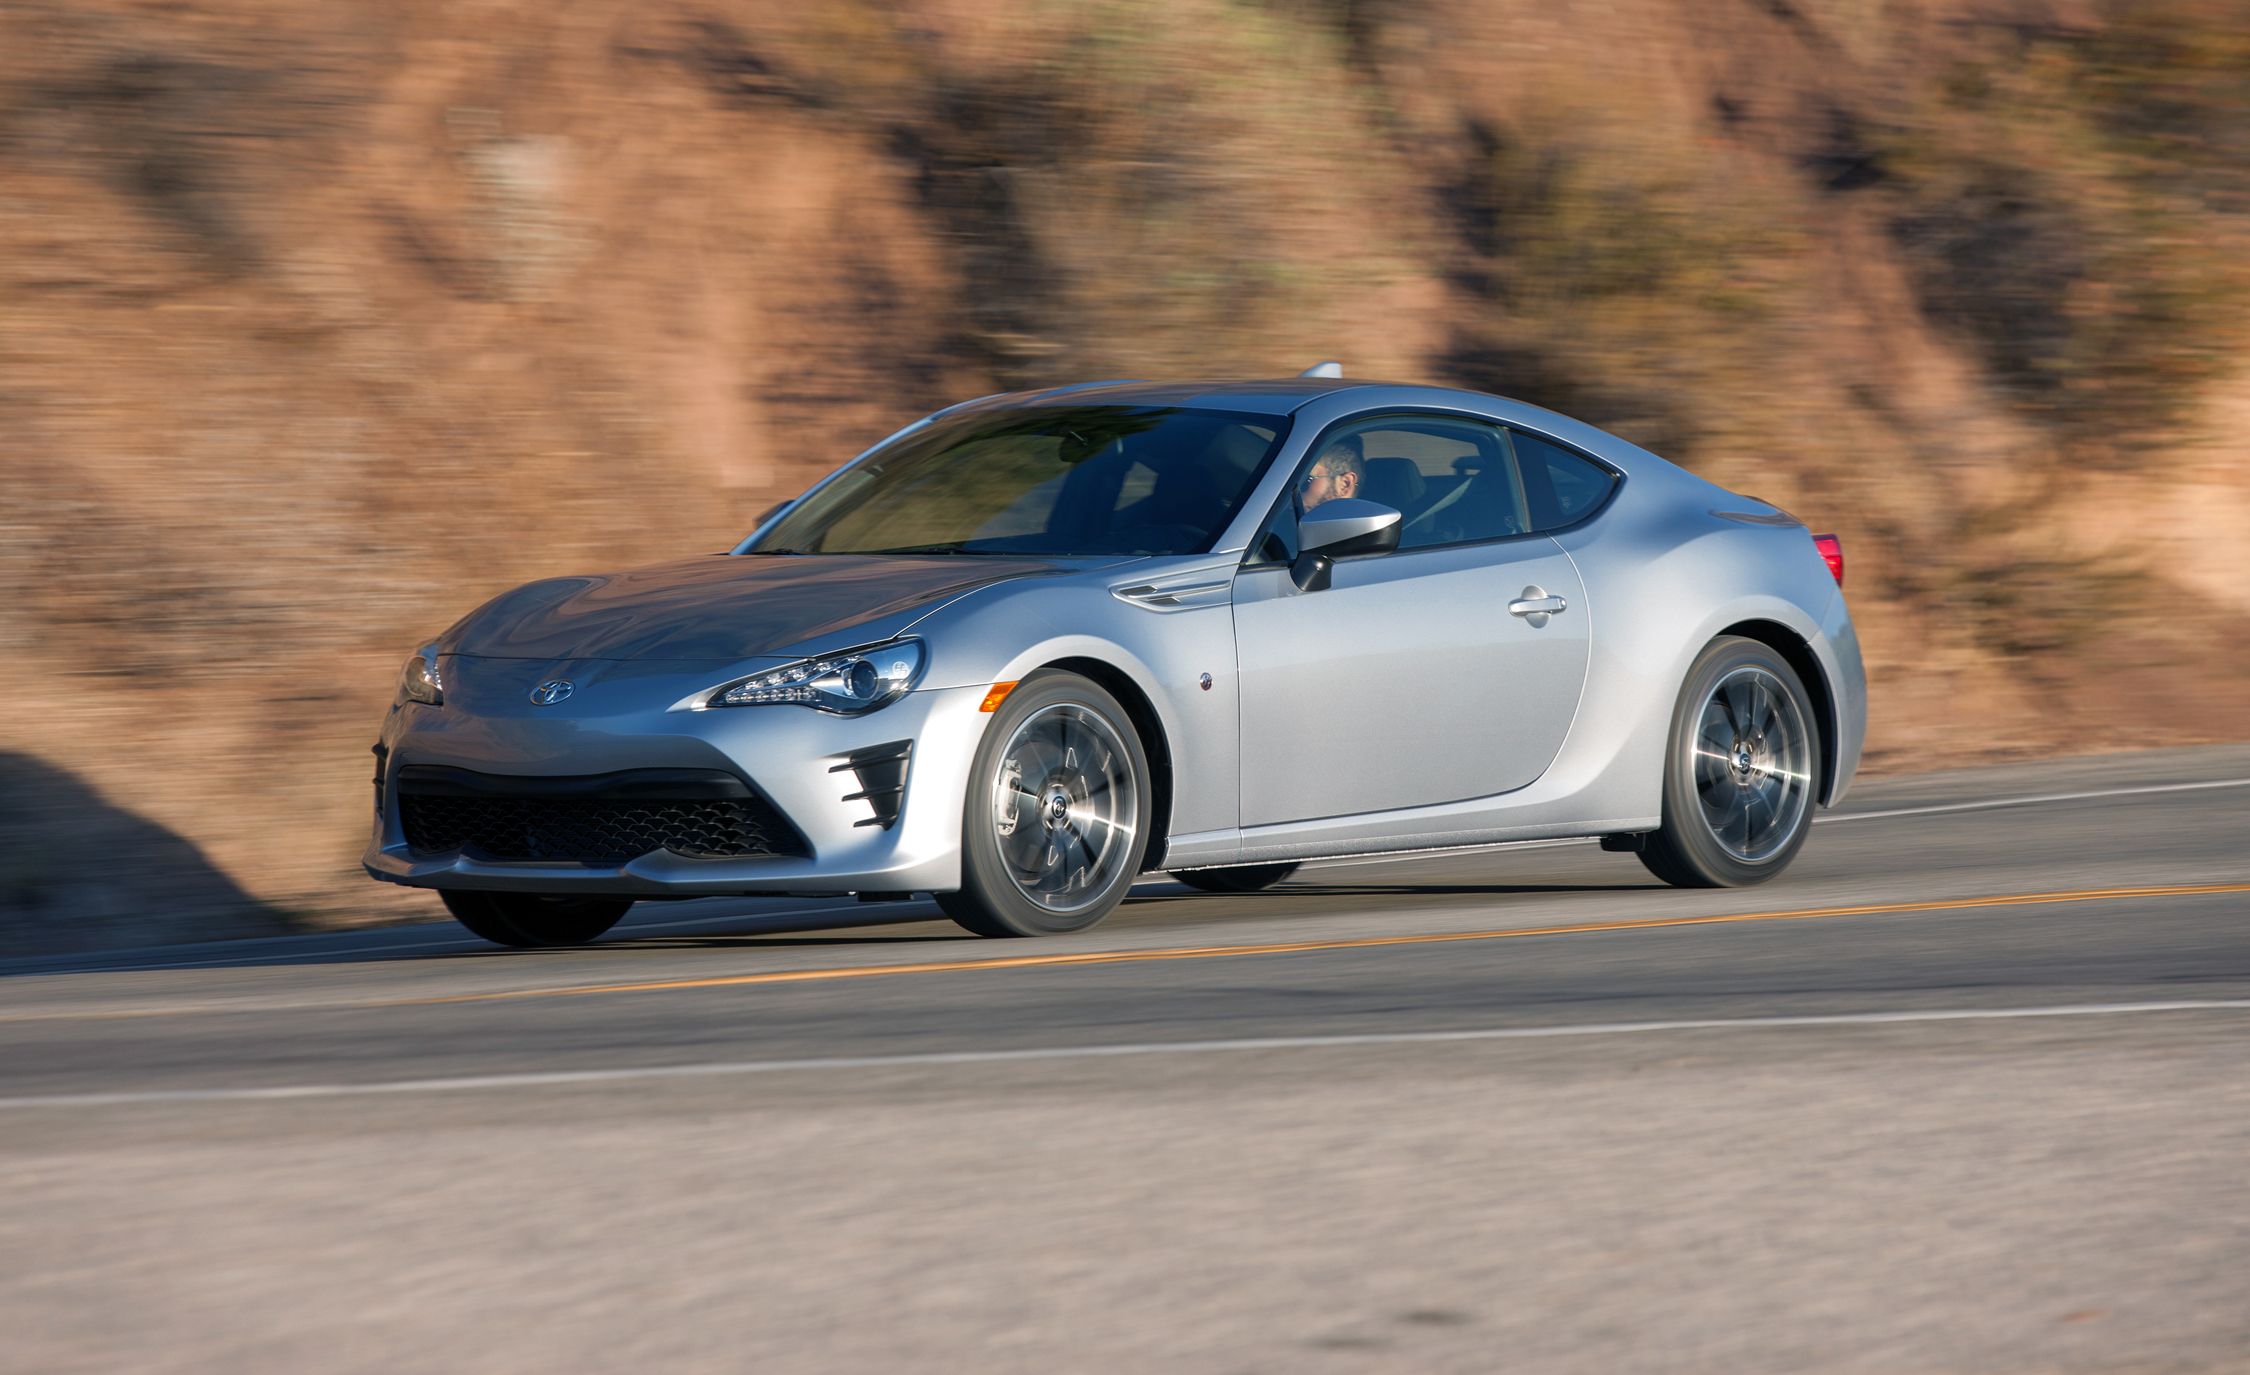 2017 Toyota 86 first drive: Even better than the Scion FR-S